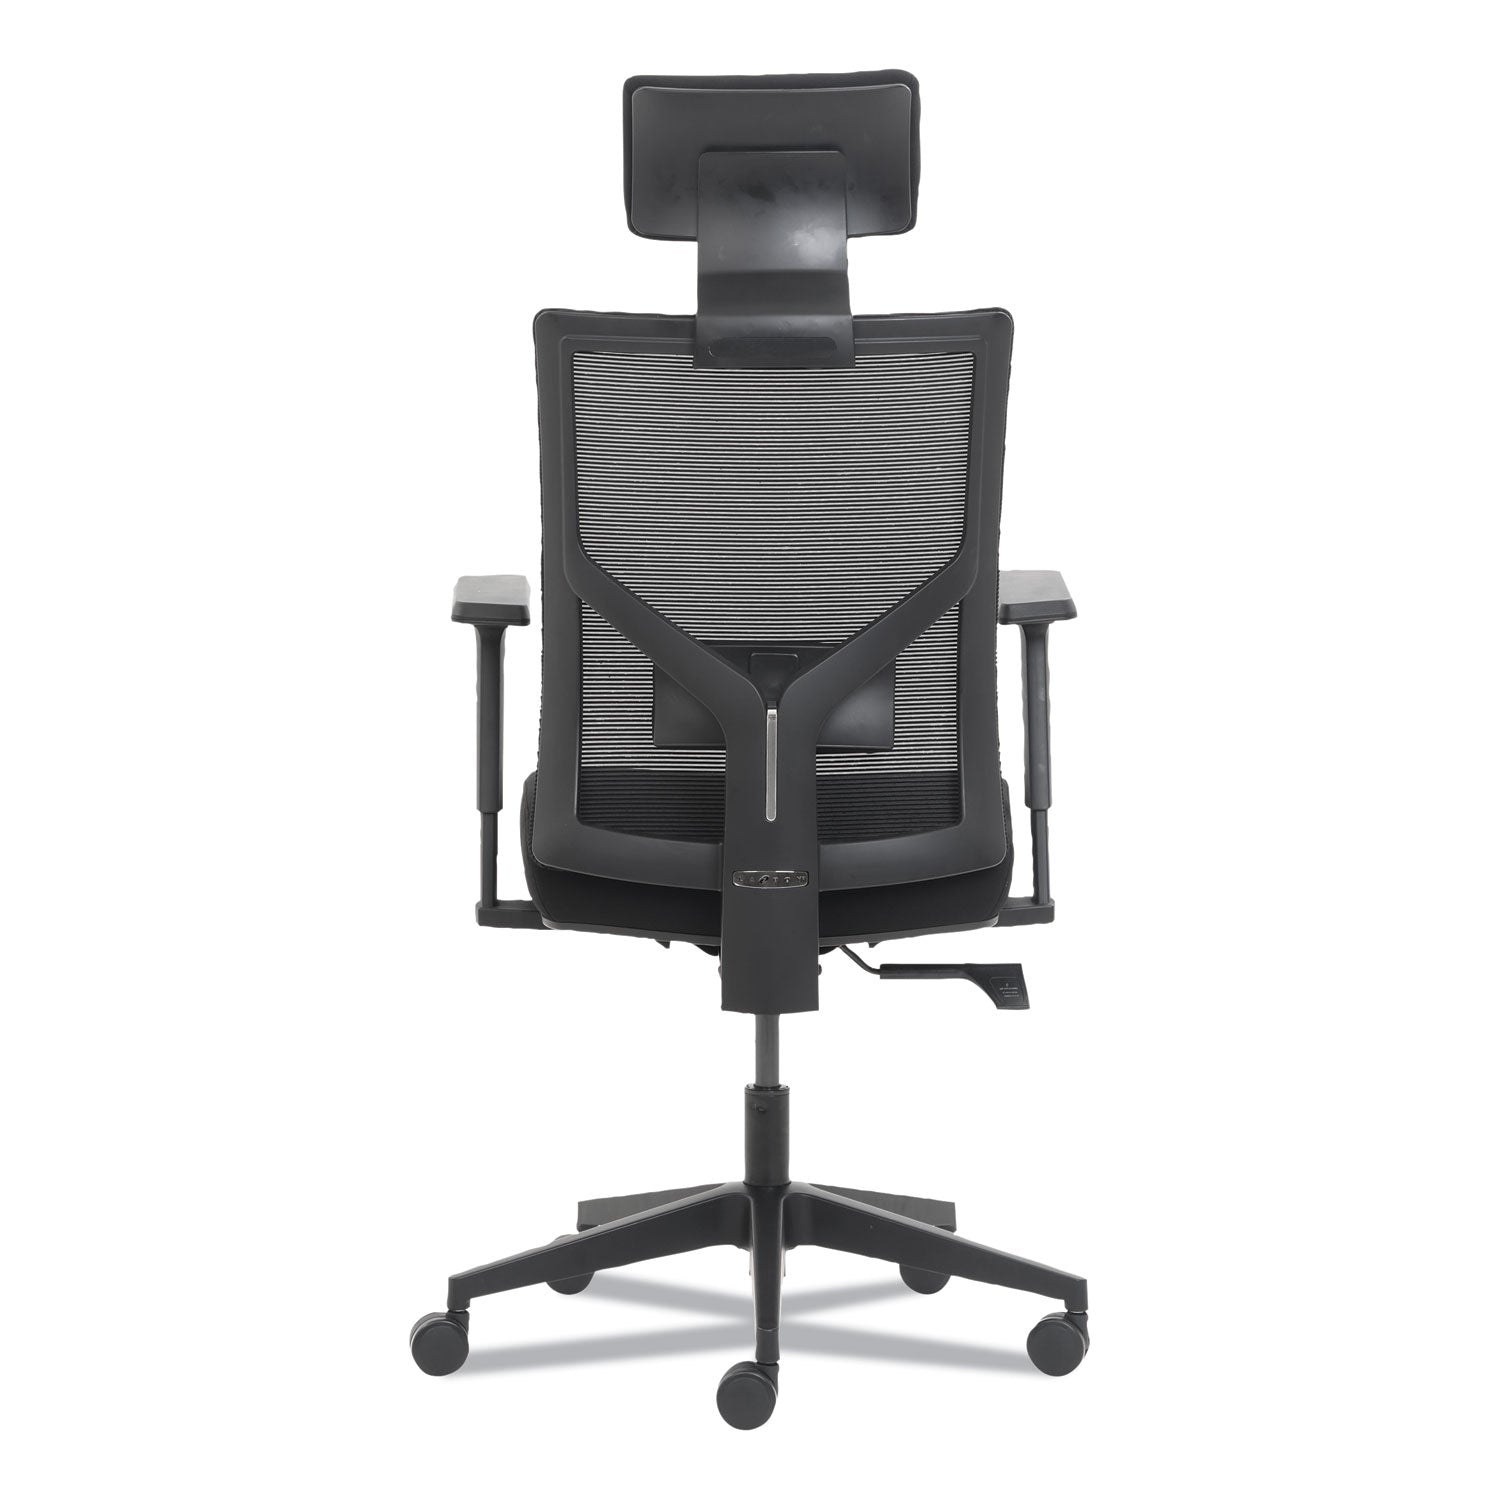 mesh-back-molded-foam-task-chair-supports-up-to-275-lb-black-seat-back_lzb60021 - 2